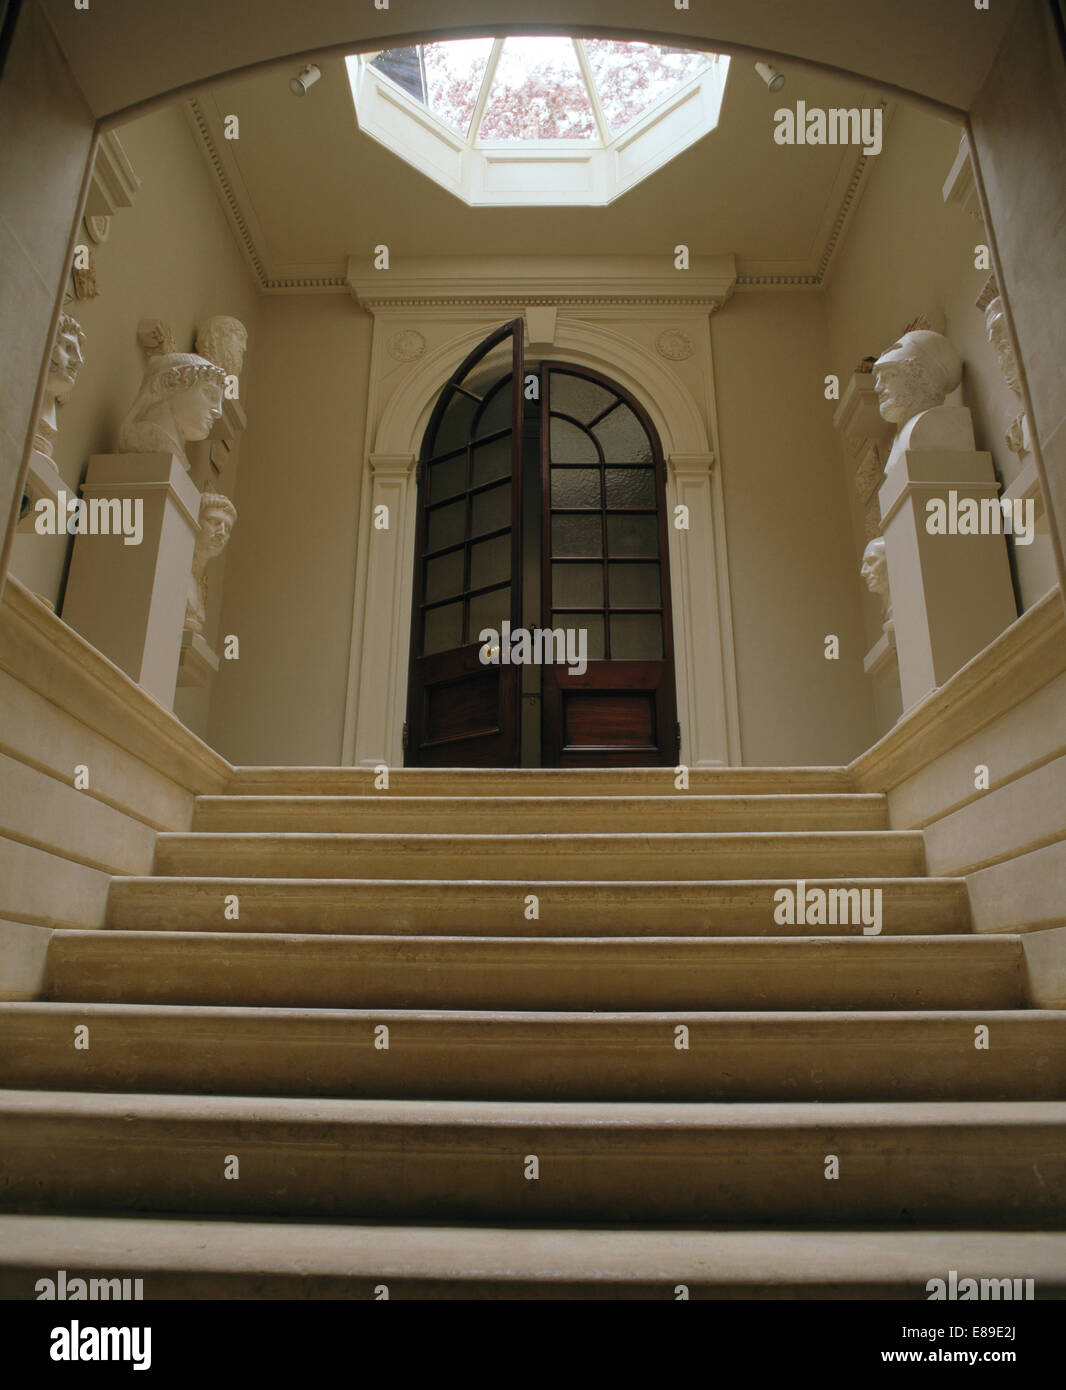 Stone staircase and busts on plinths in large hall with half glazed double doors Stock Photo